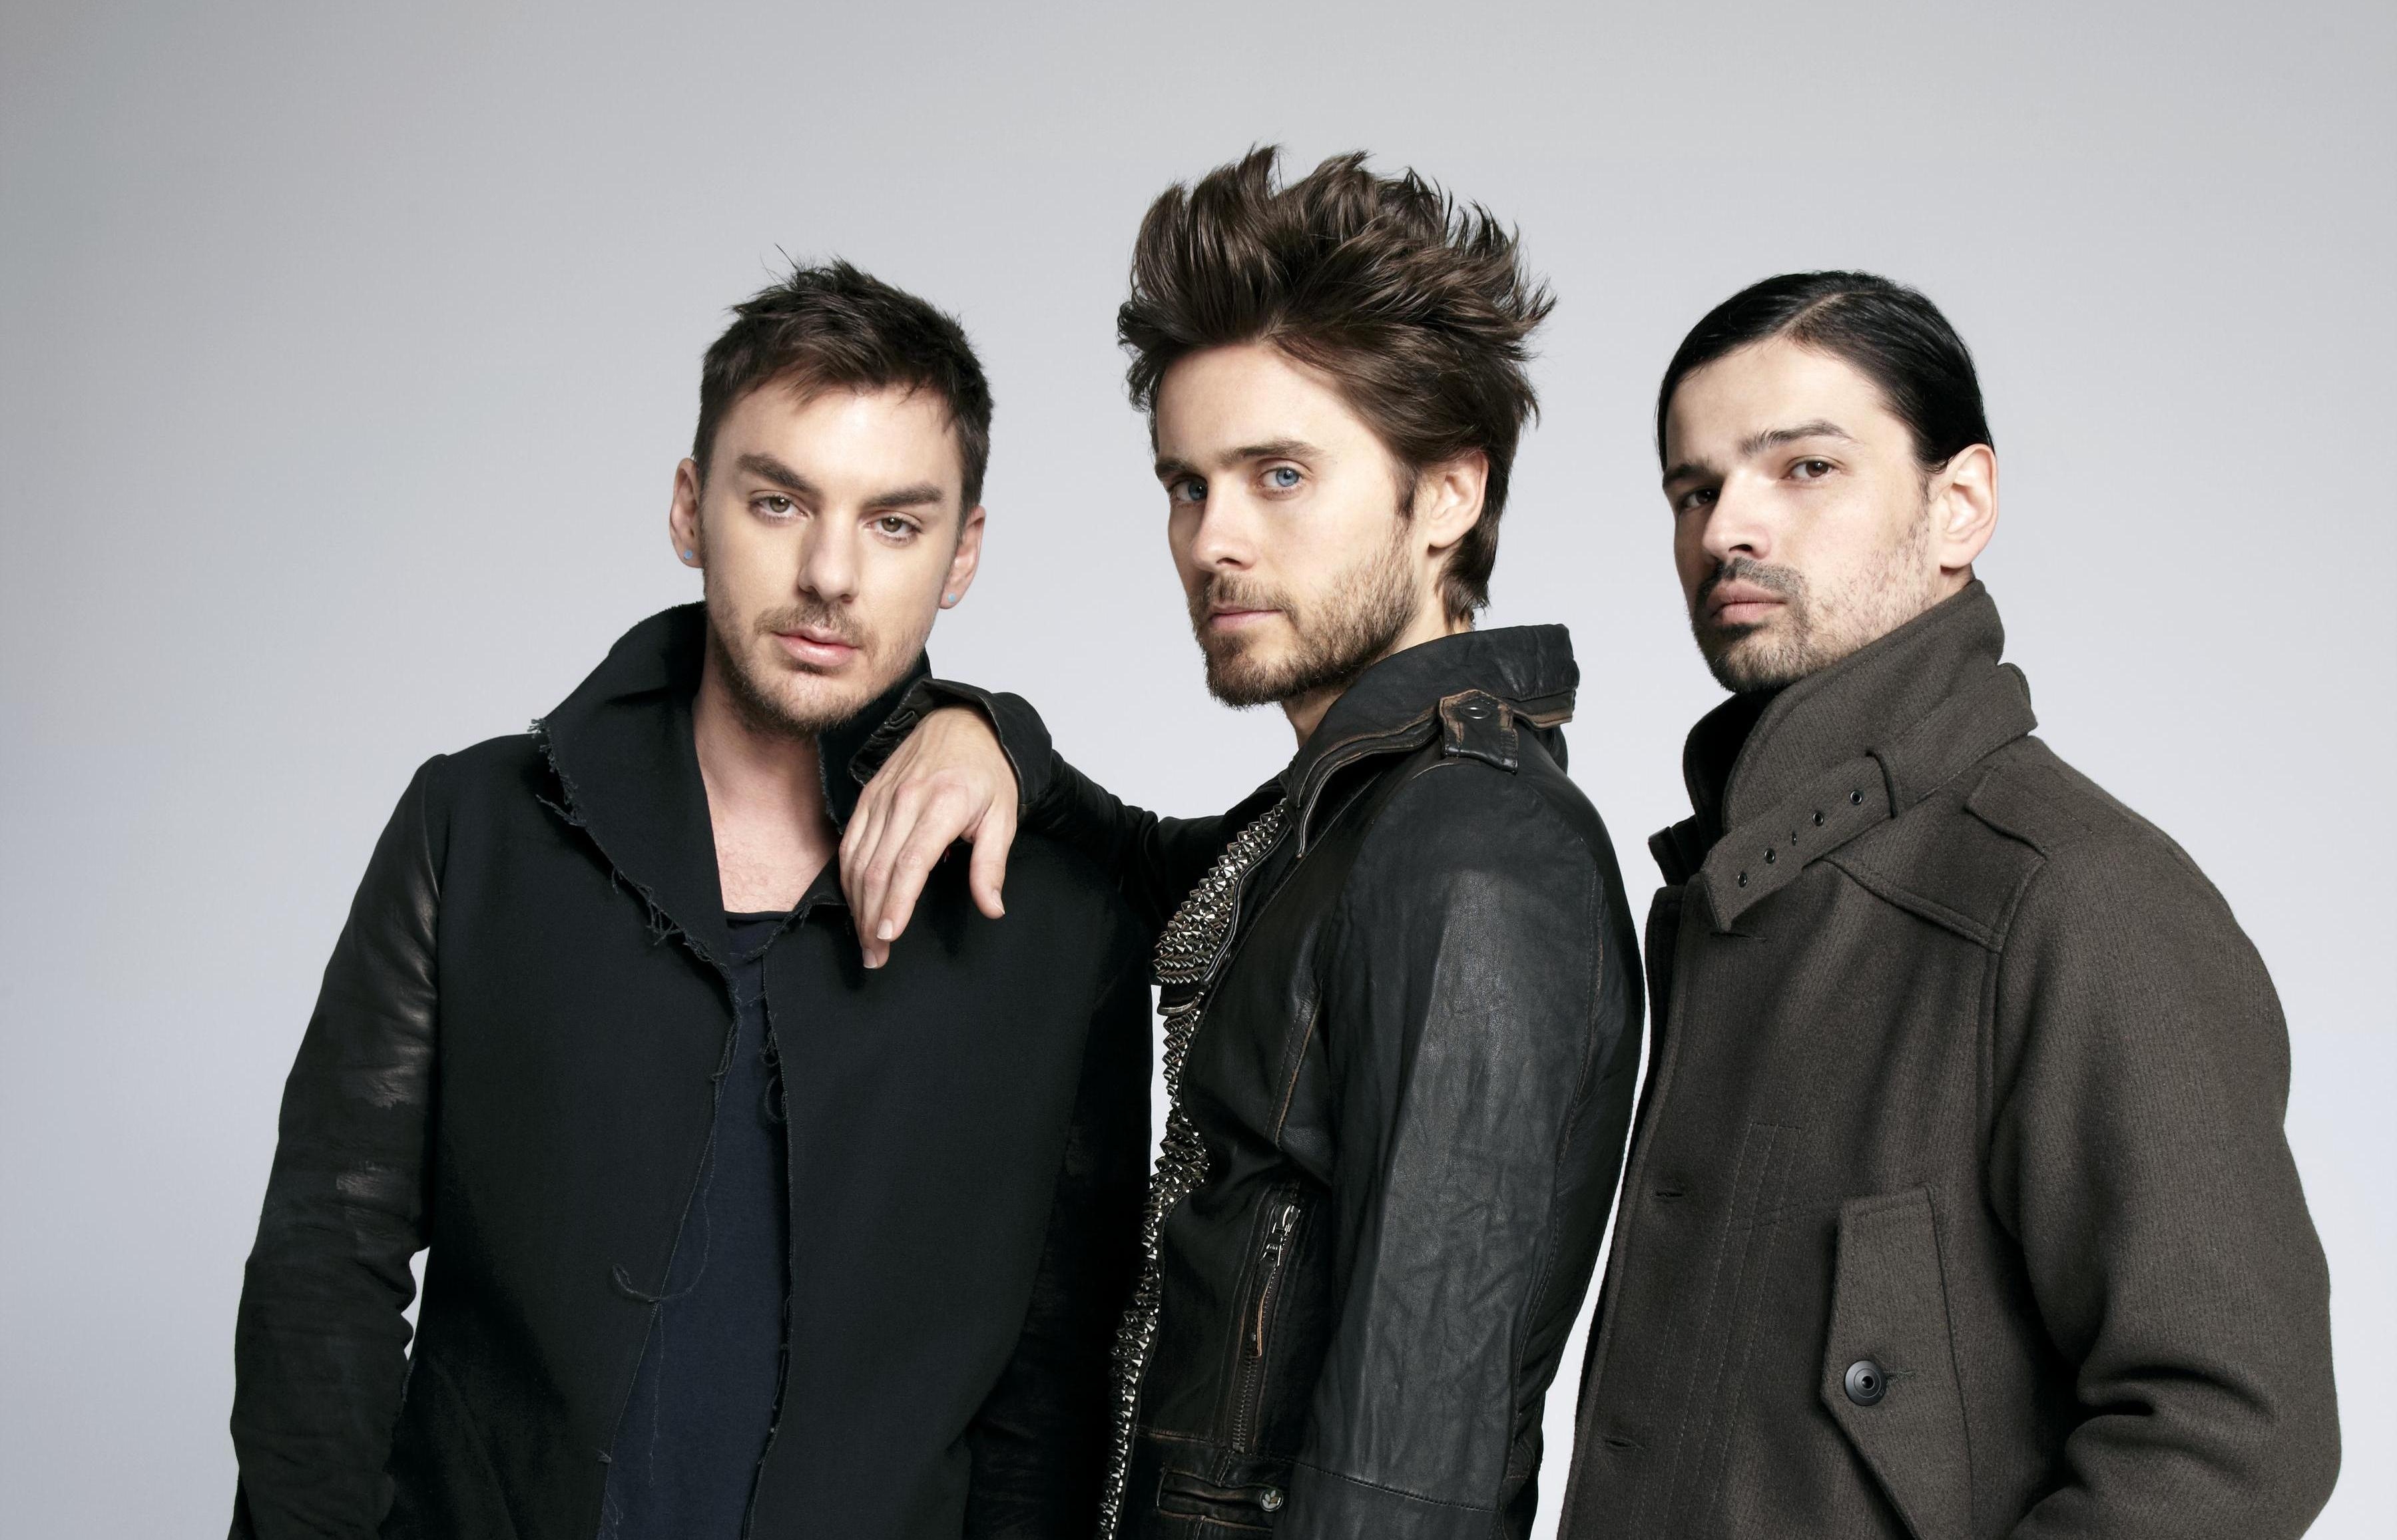 Thirty Seconds To Mars Backgrounds, Compatible - PC, Mobile, Gadgets| 3600x2313 px